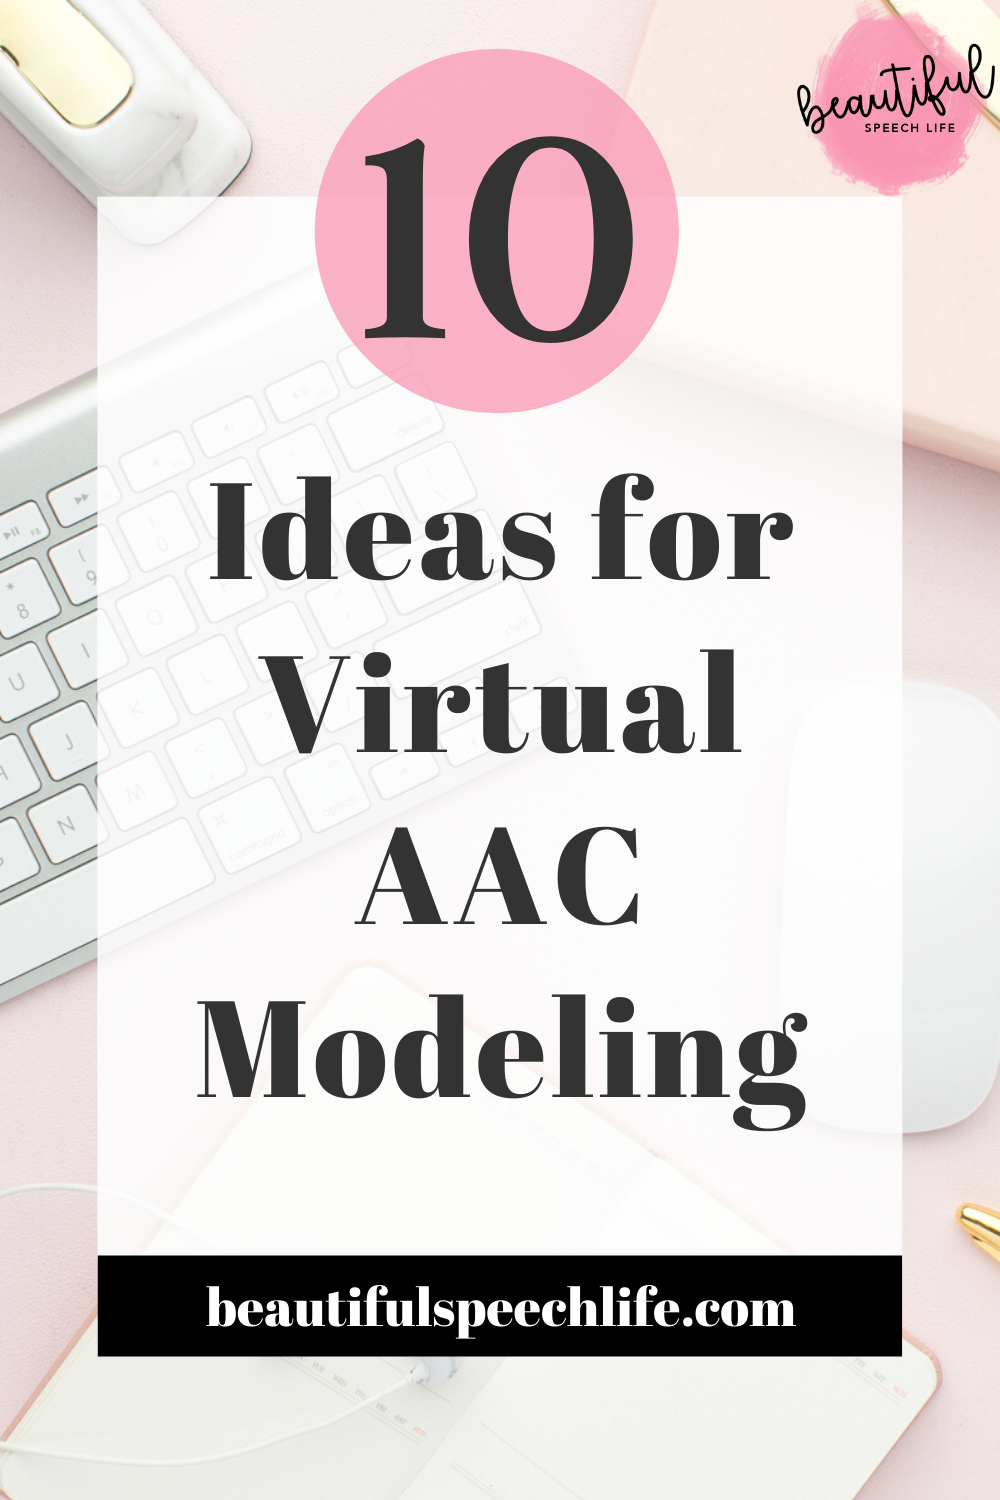 10 Ideas for Virtual AAC Modeling